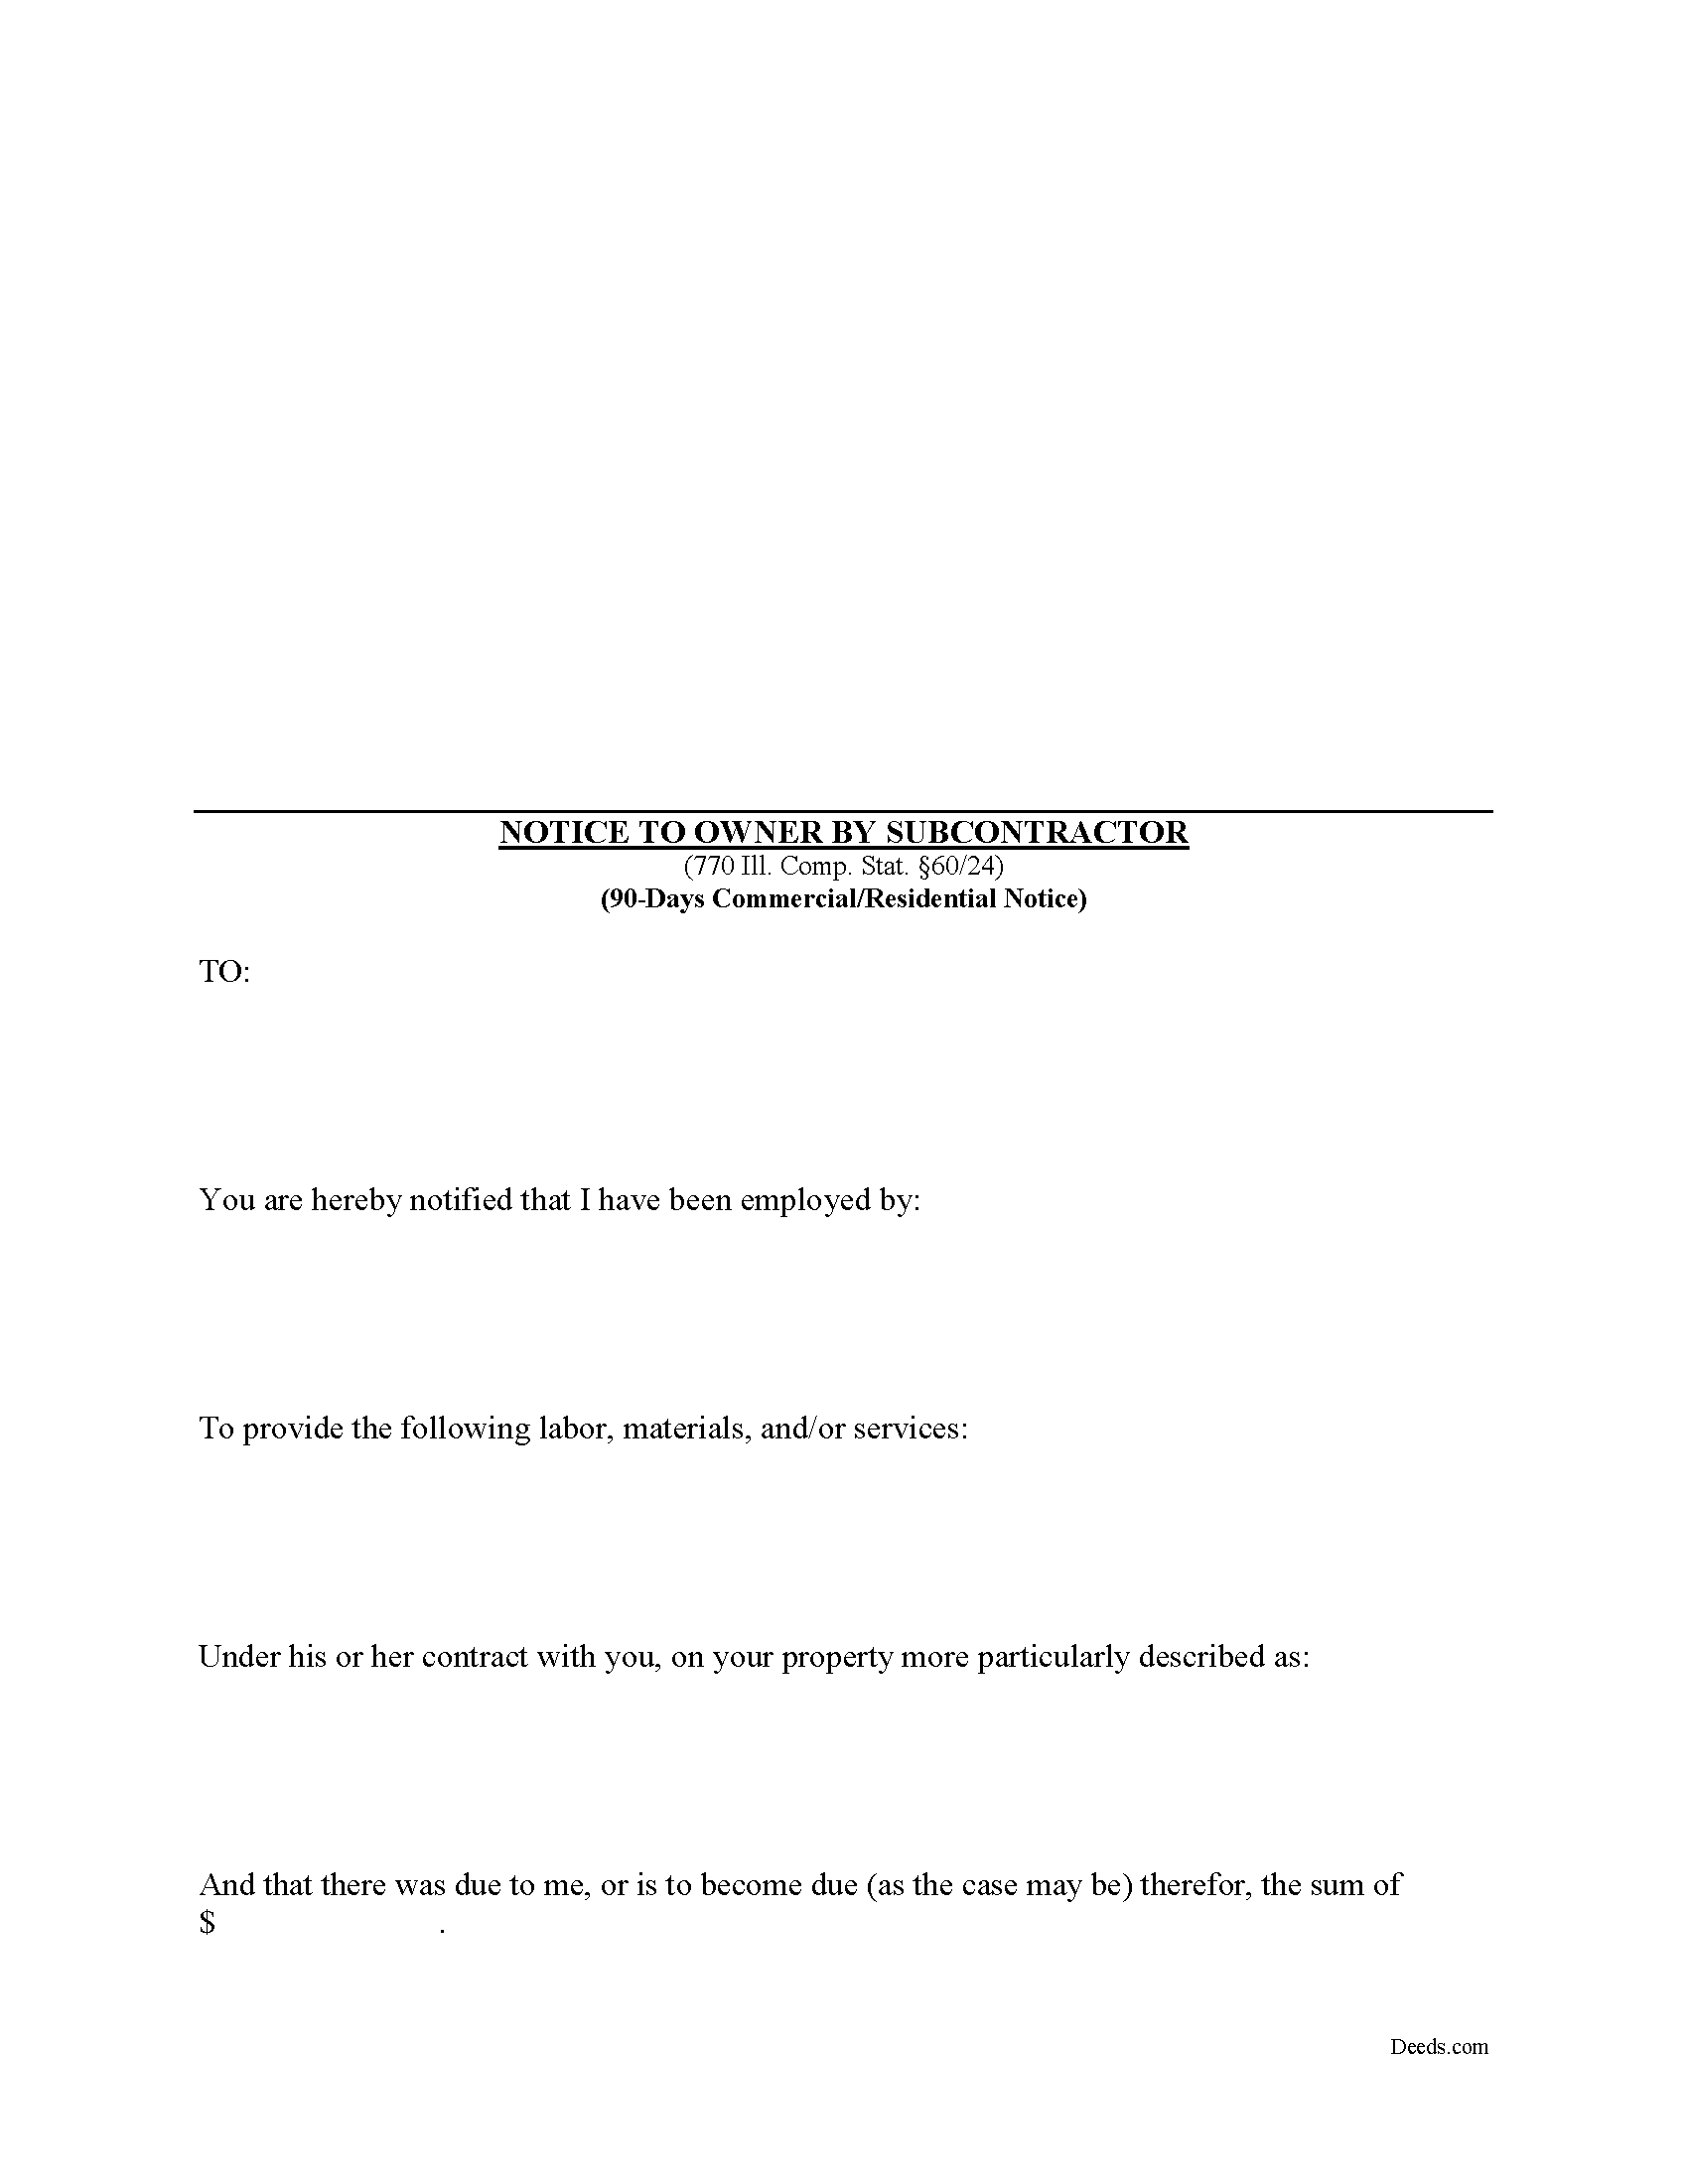 Completed Example of the Preliminary 90 Day Notice Document